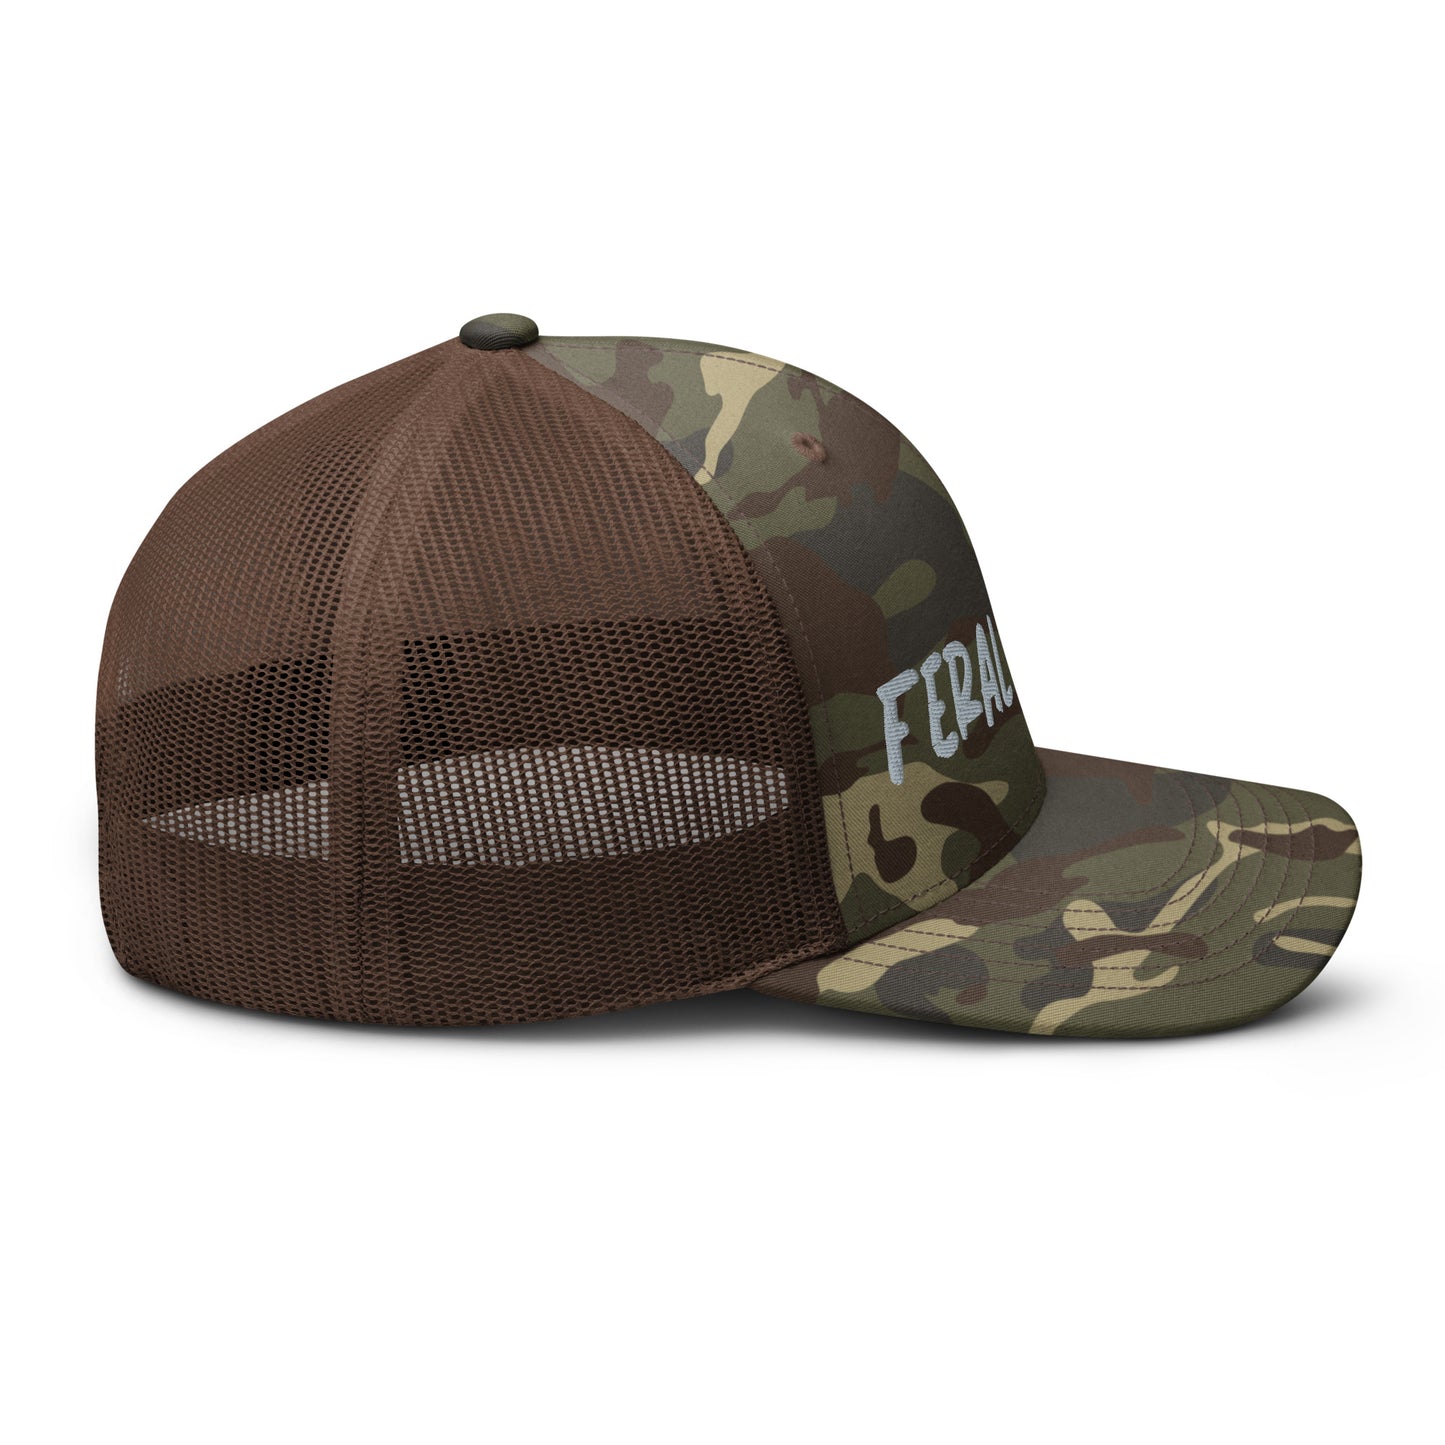 FERAL - Embroidered Camo Hat